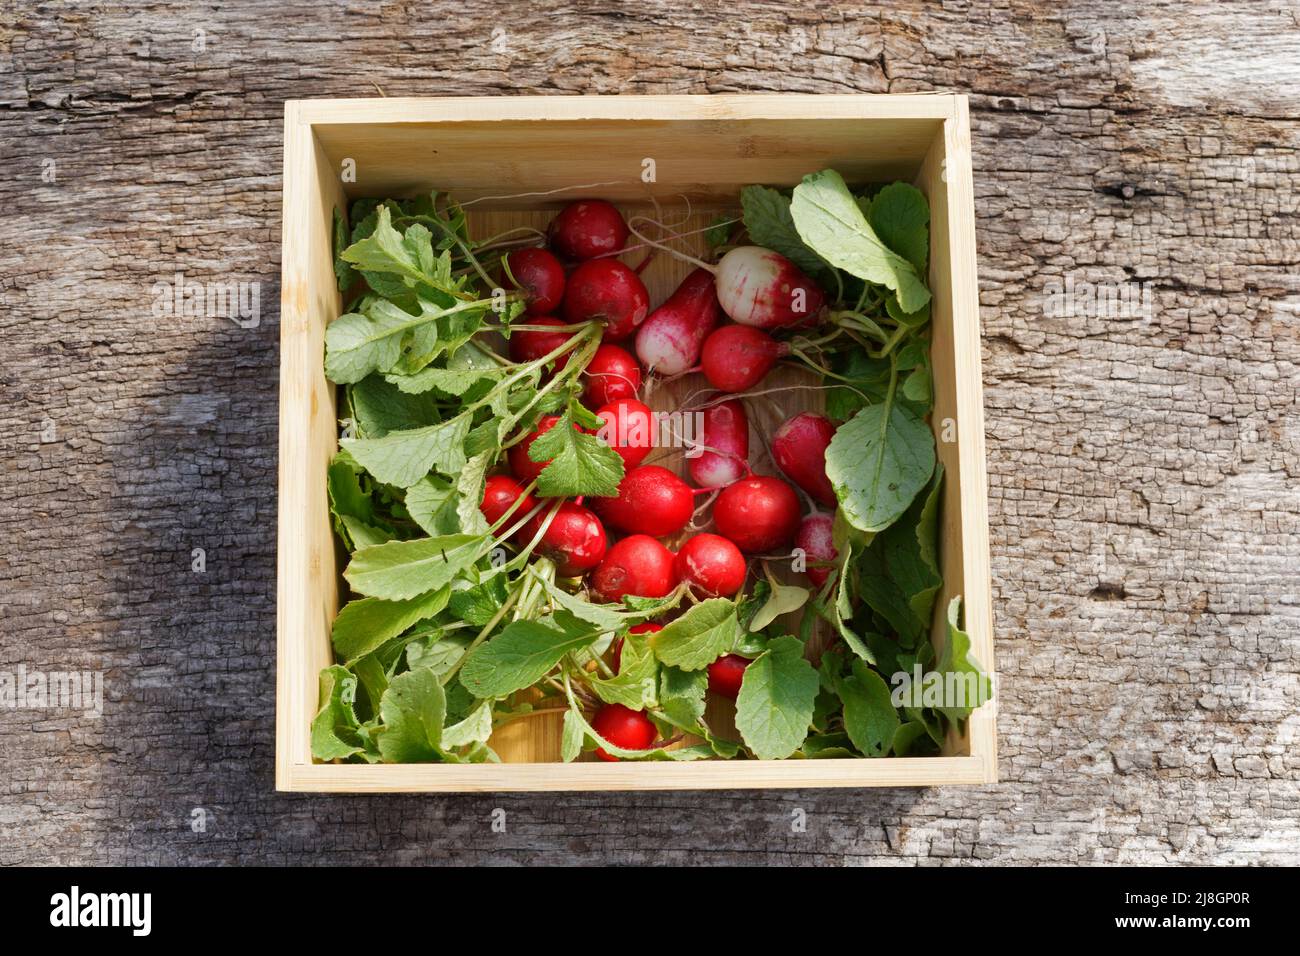 Picking radishes from the garden in a small wooden box Stock Photo